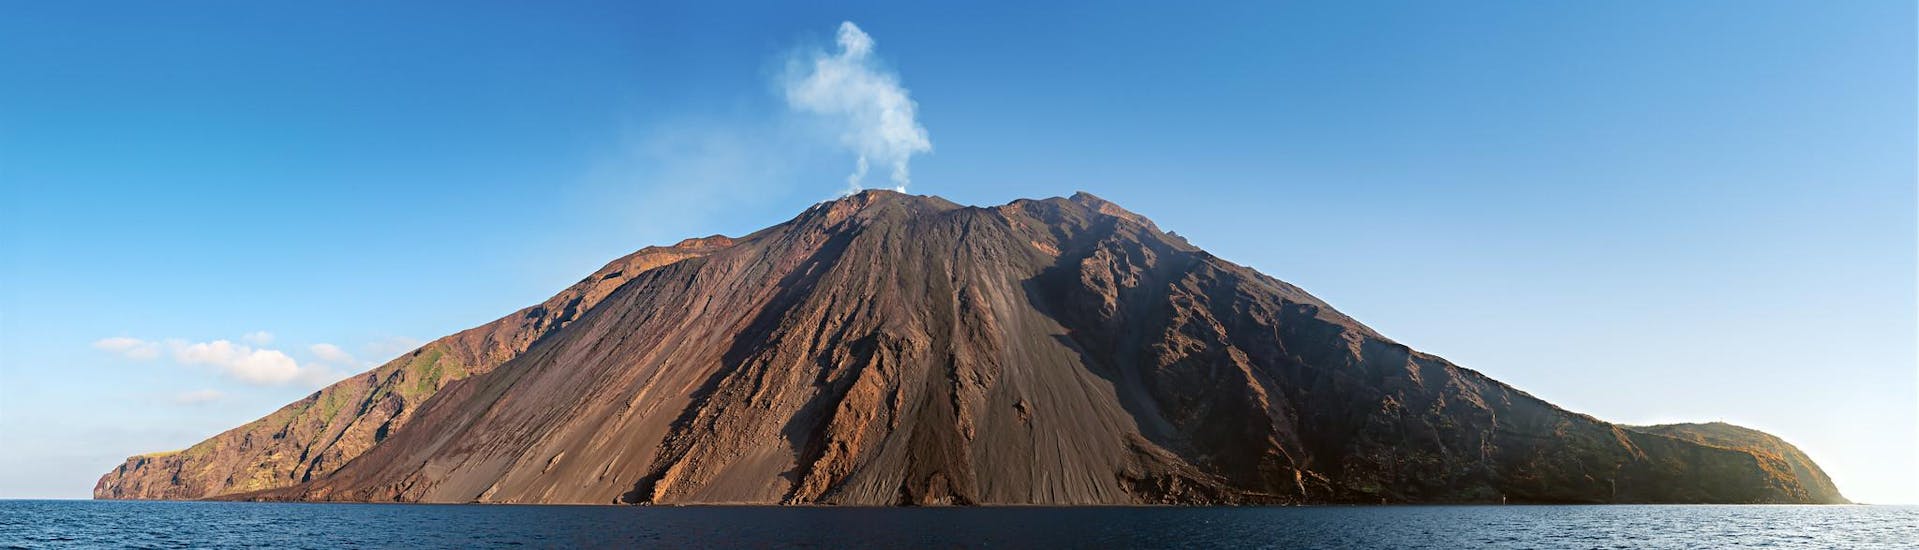 Take a Volcano tour or enjoy hiking to the top of a volcano